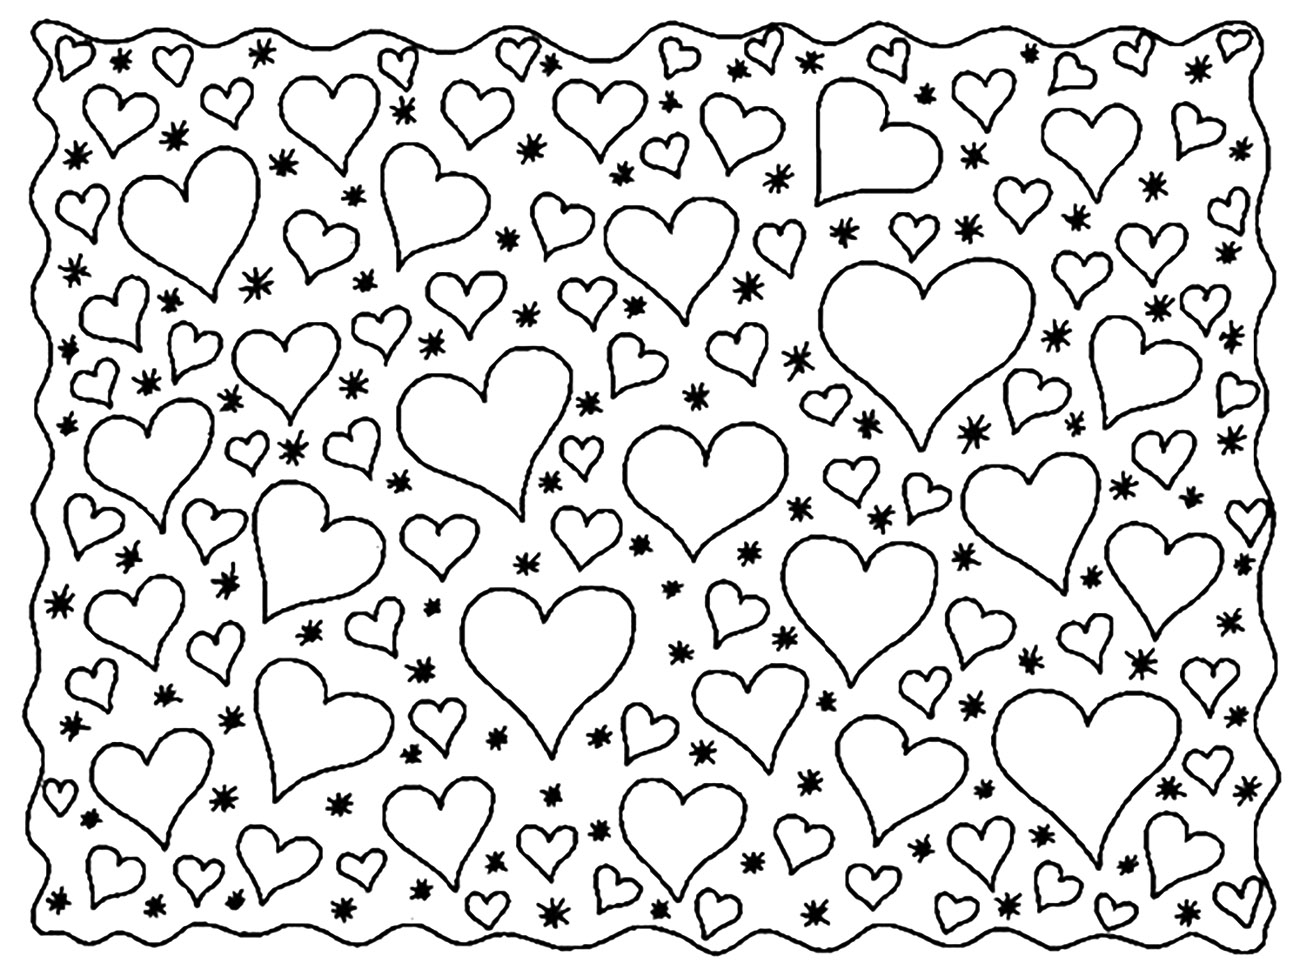 Hearts of different sizes to color. Fall in love with this beautiful coloring page!